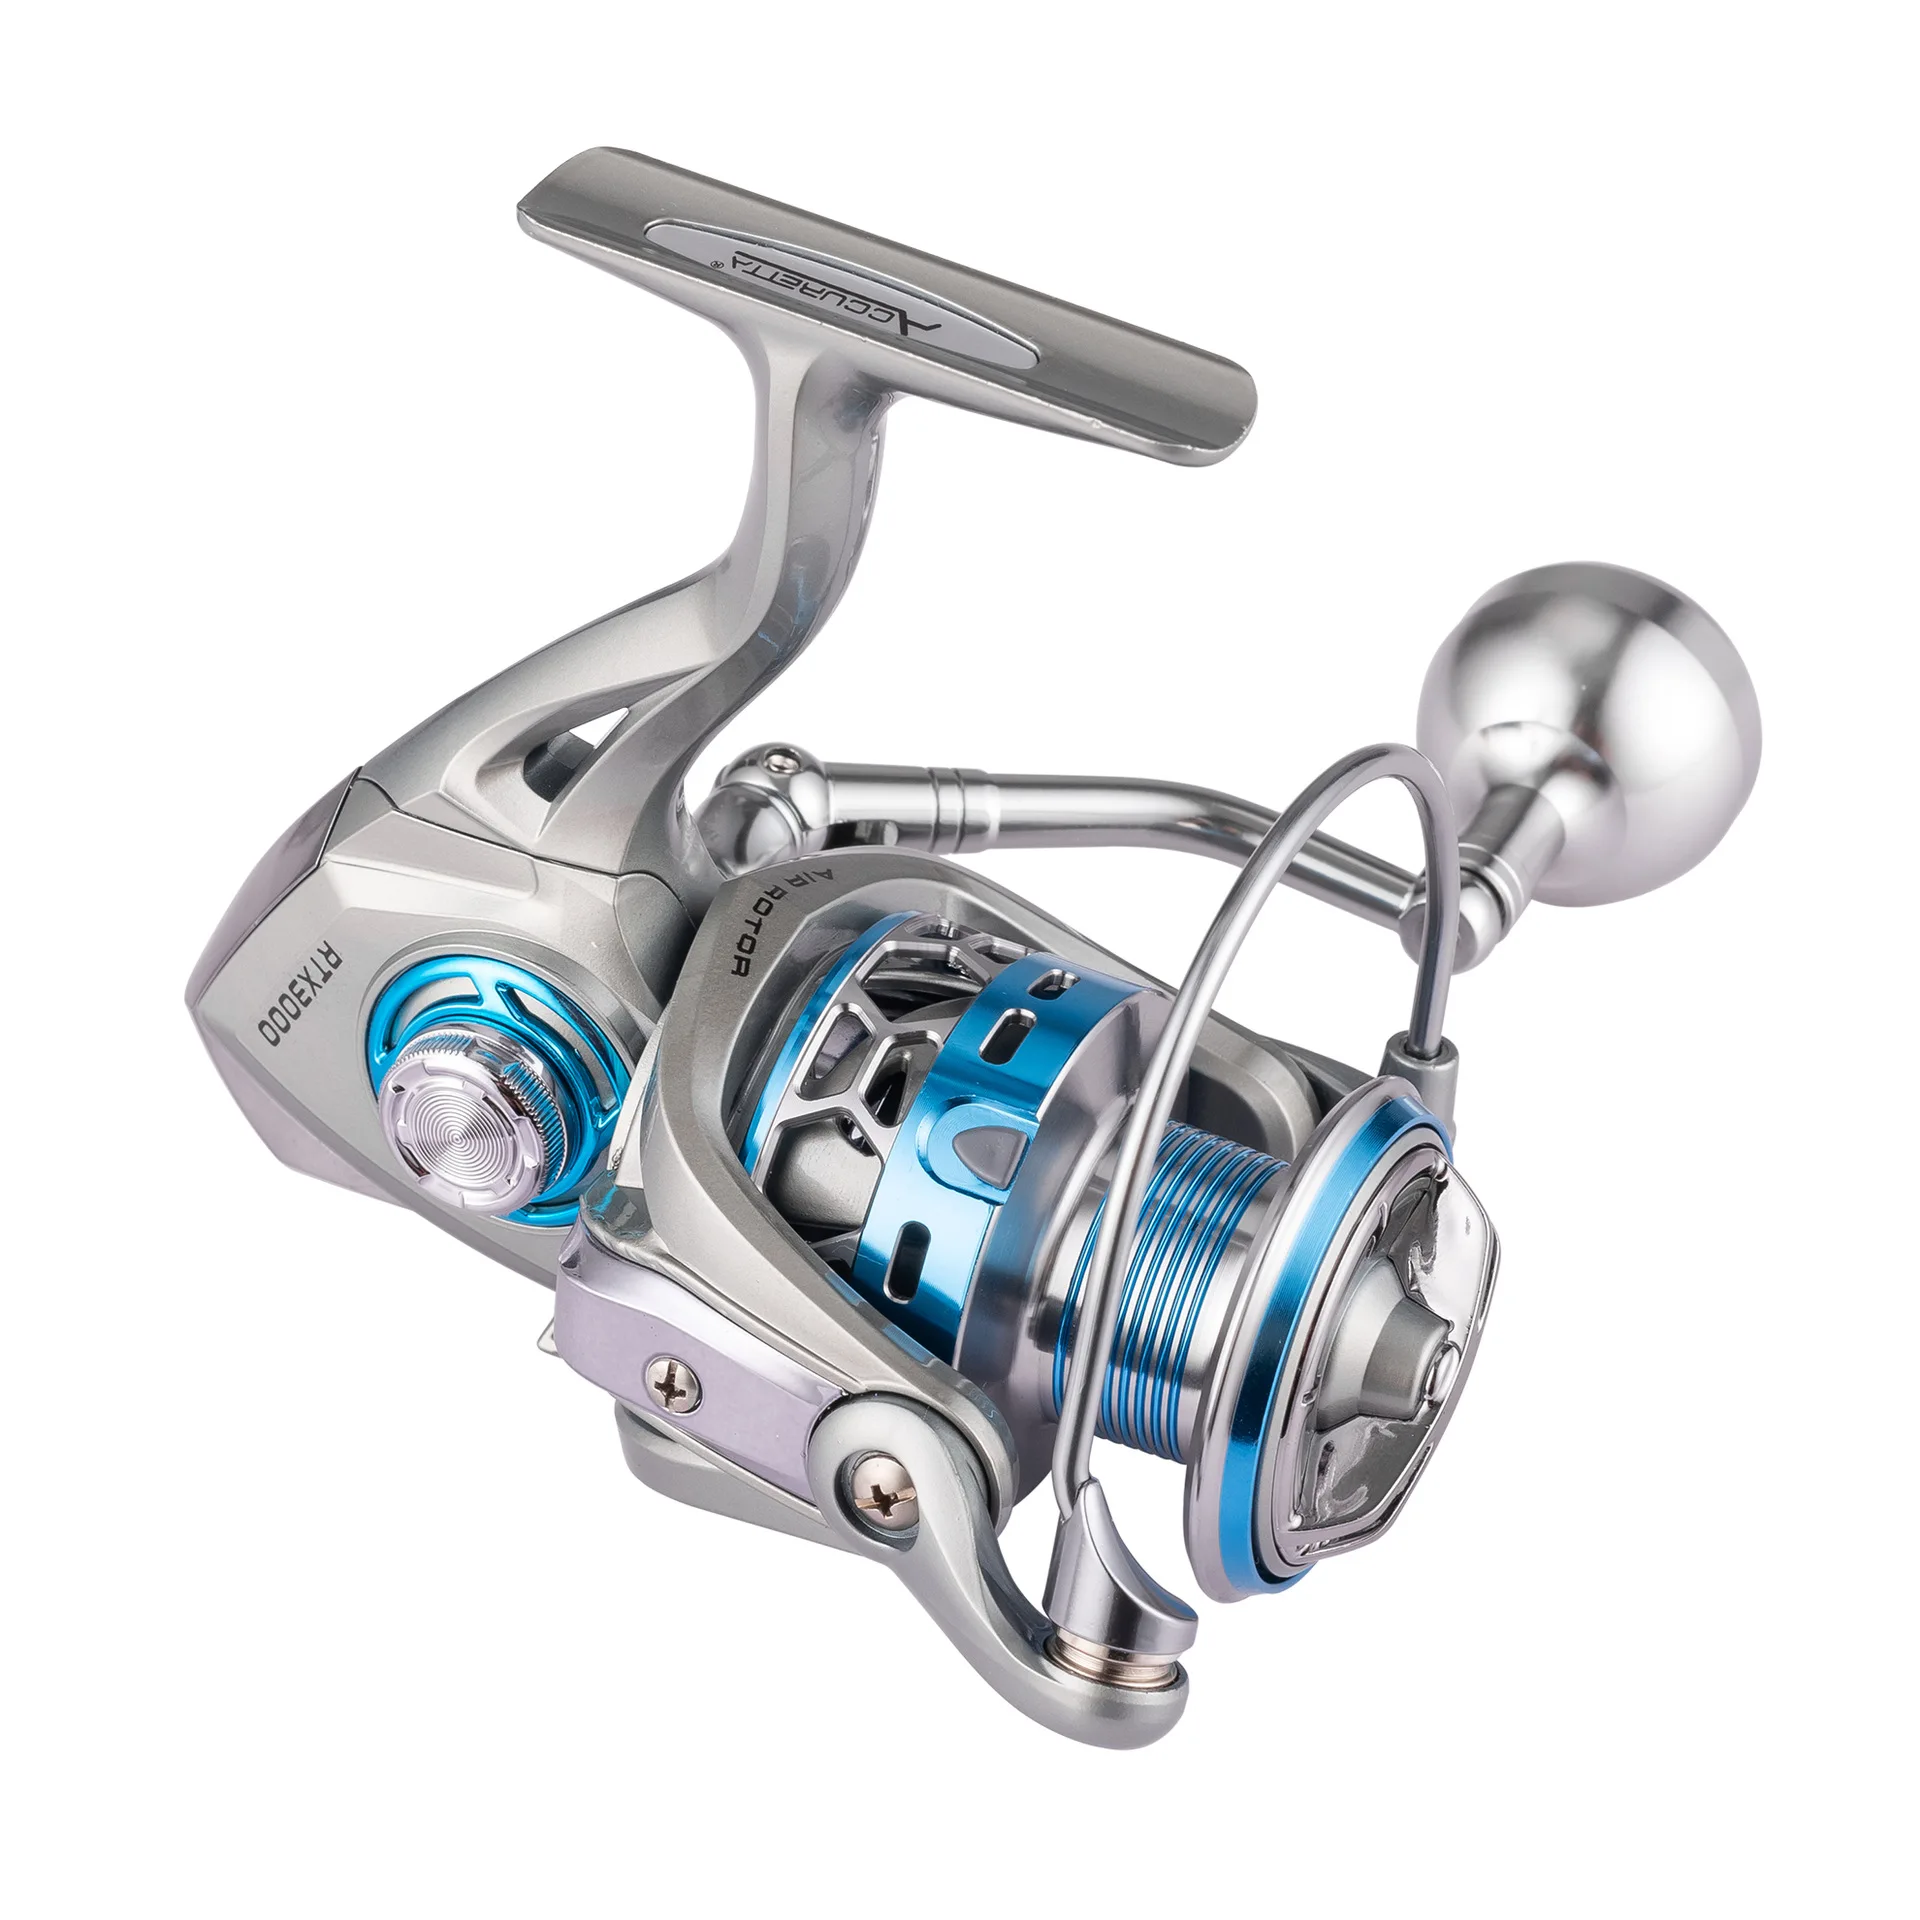 New 1000-6000 RTX-Series Freshwater Bass Spinning Fishing Reel